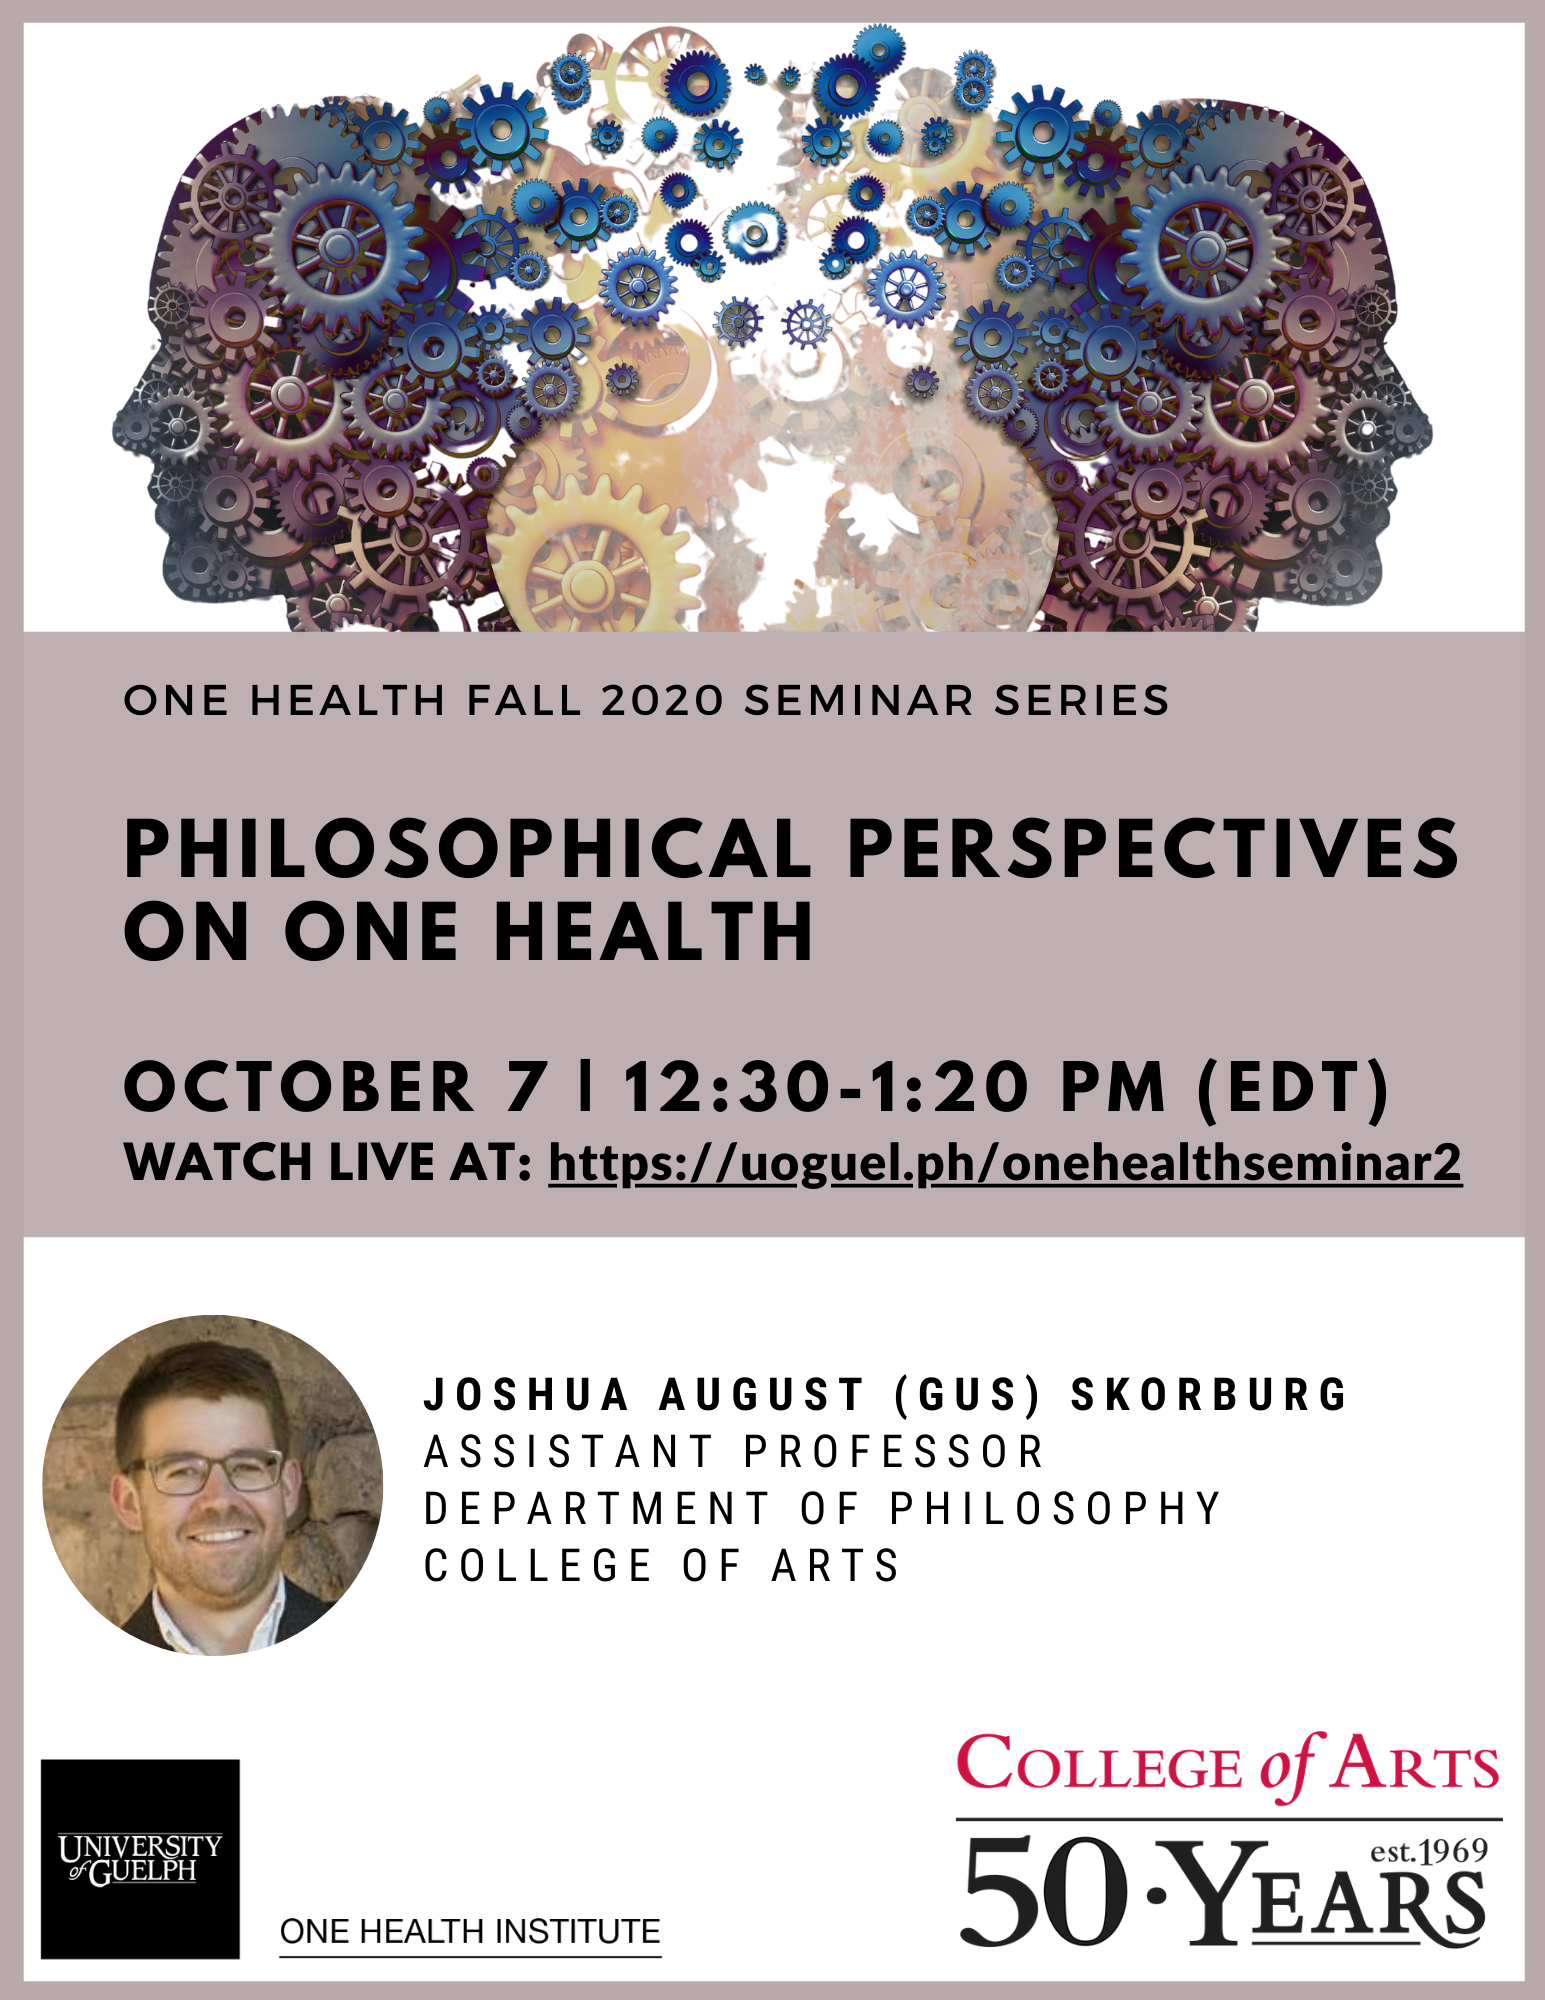 Poster announcing One Health Fall 2020 Seminar Series Philosophical Perspectives on One Health October 7 | 12:30-1:20PM (EDT) Watch live at: https://uoguel.ph/onehealthseminar2 with Joshua August (Gus) Skorburg (Assistant Professor, Department of Philosophy, College of Arts). Graphic with silhouettes of two human heads made out of gears. Photo of Dr. Skorburg. One Health Institute logo and College of Arts logo.